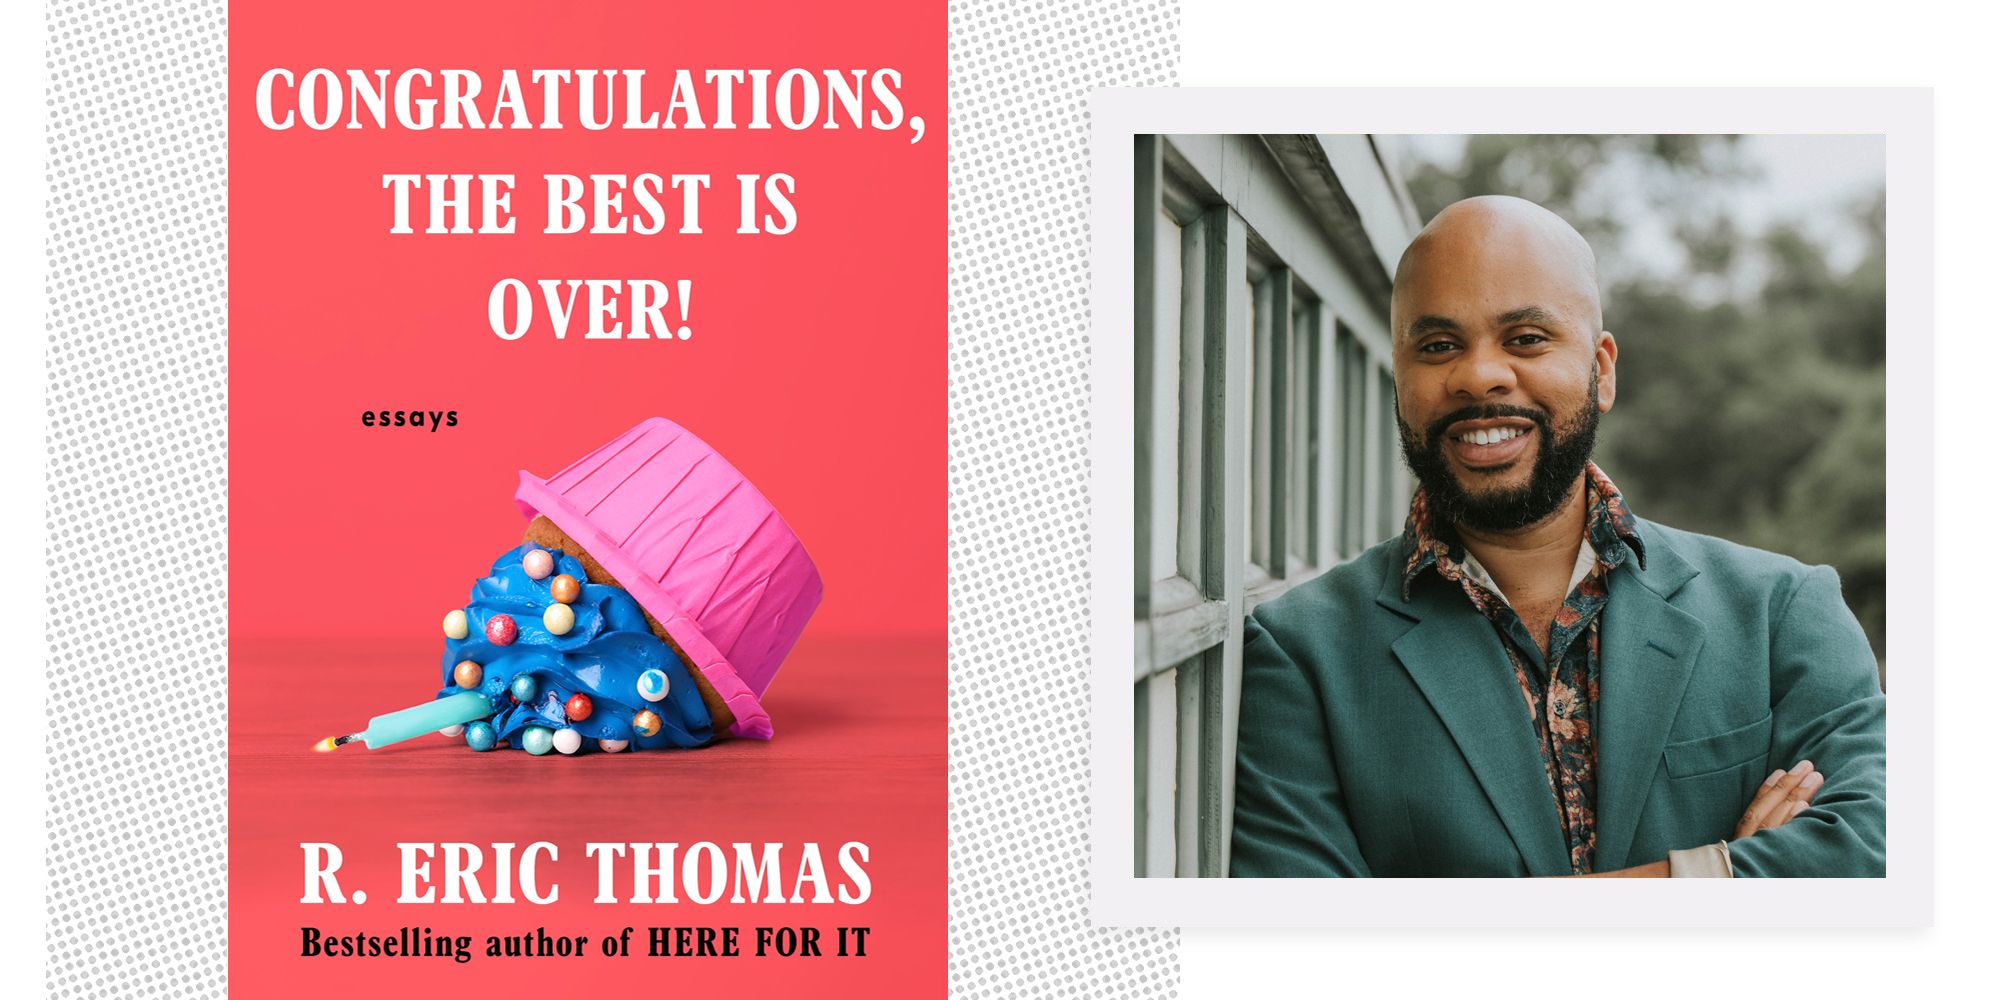 R. Eric Thomas On His New Essay Collection, 'Congratulations, The